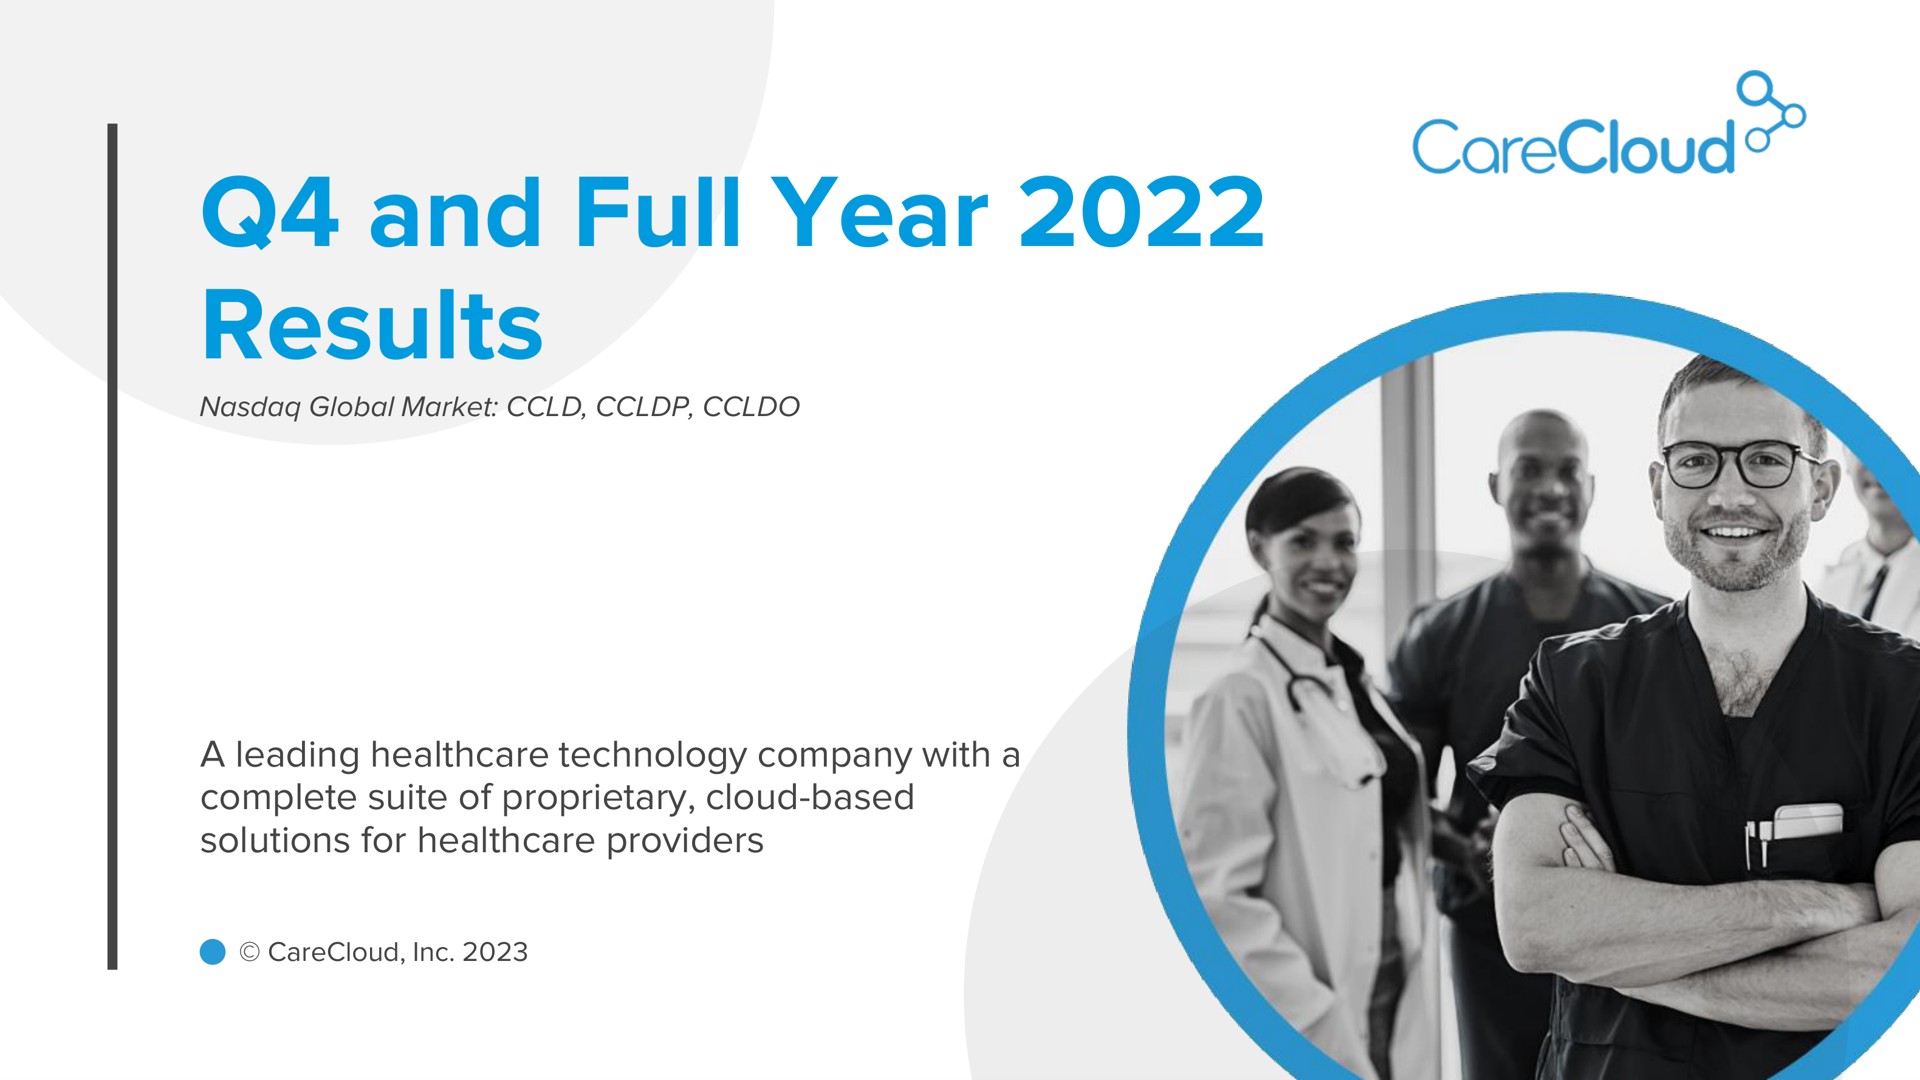 and full year results | CareCloud